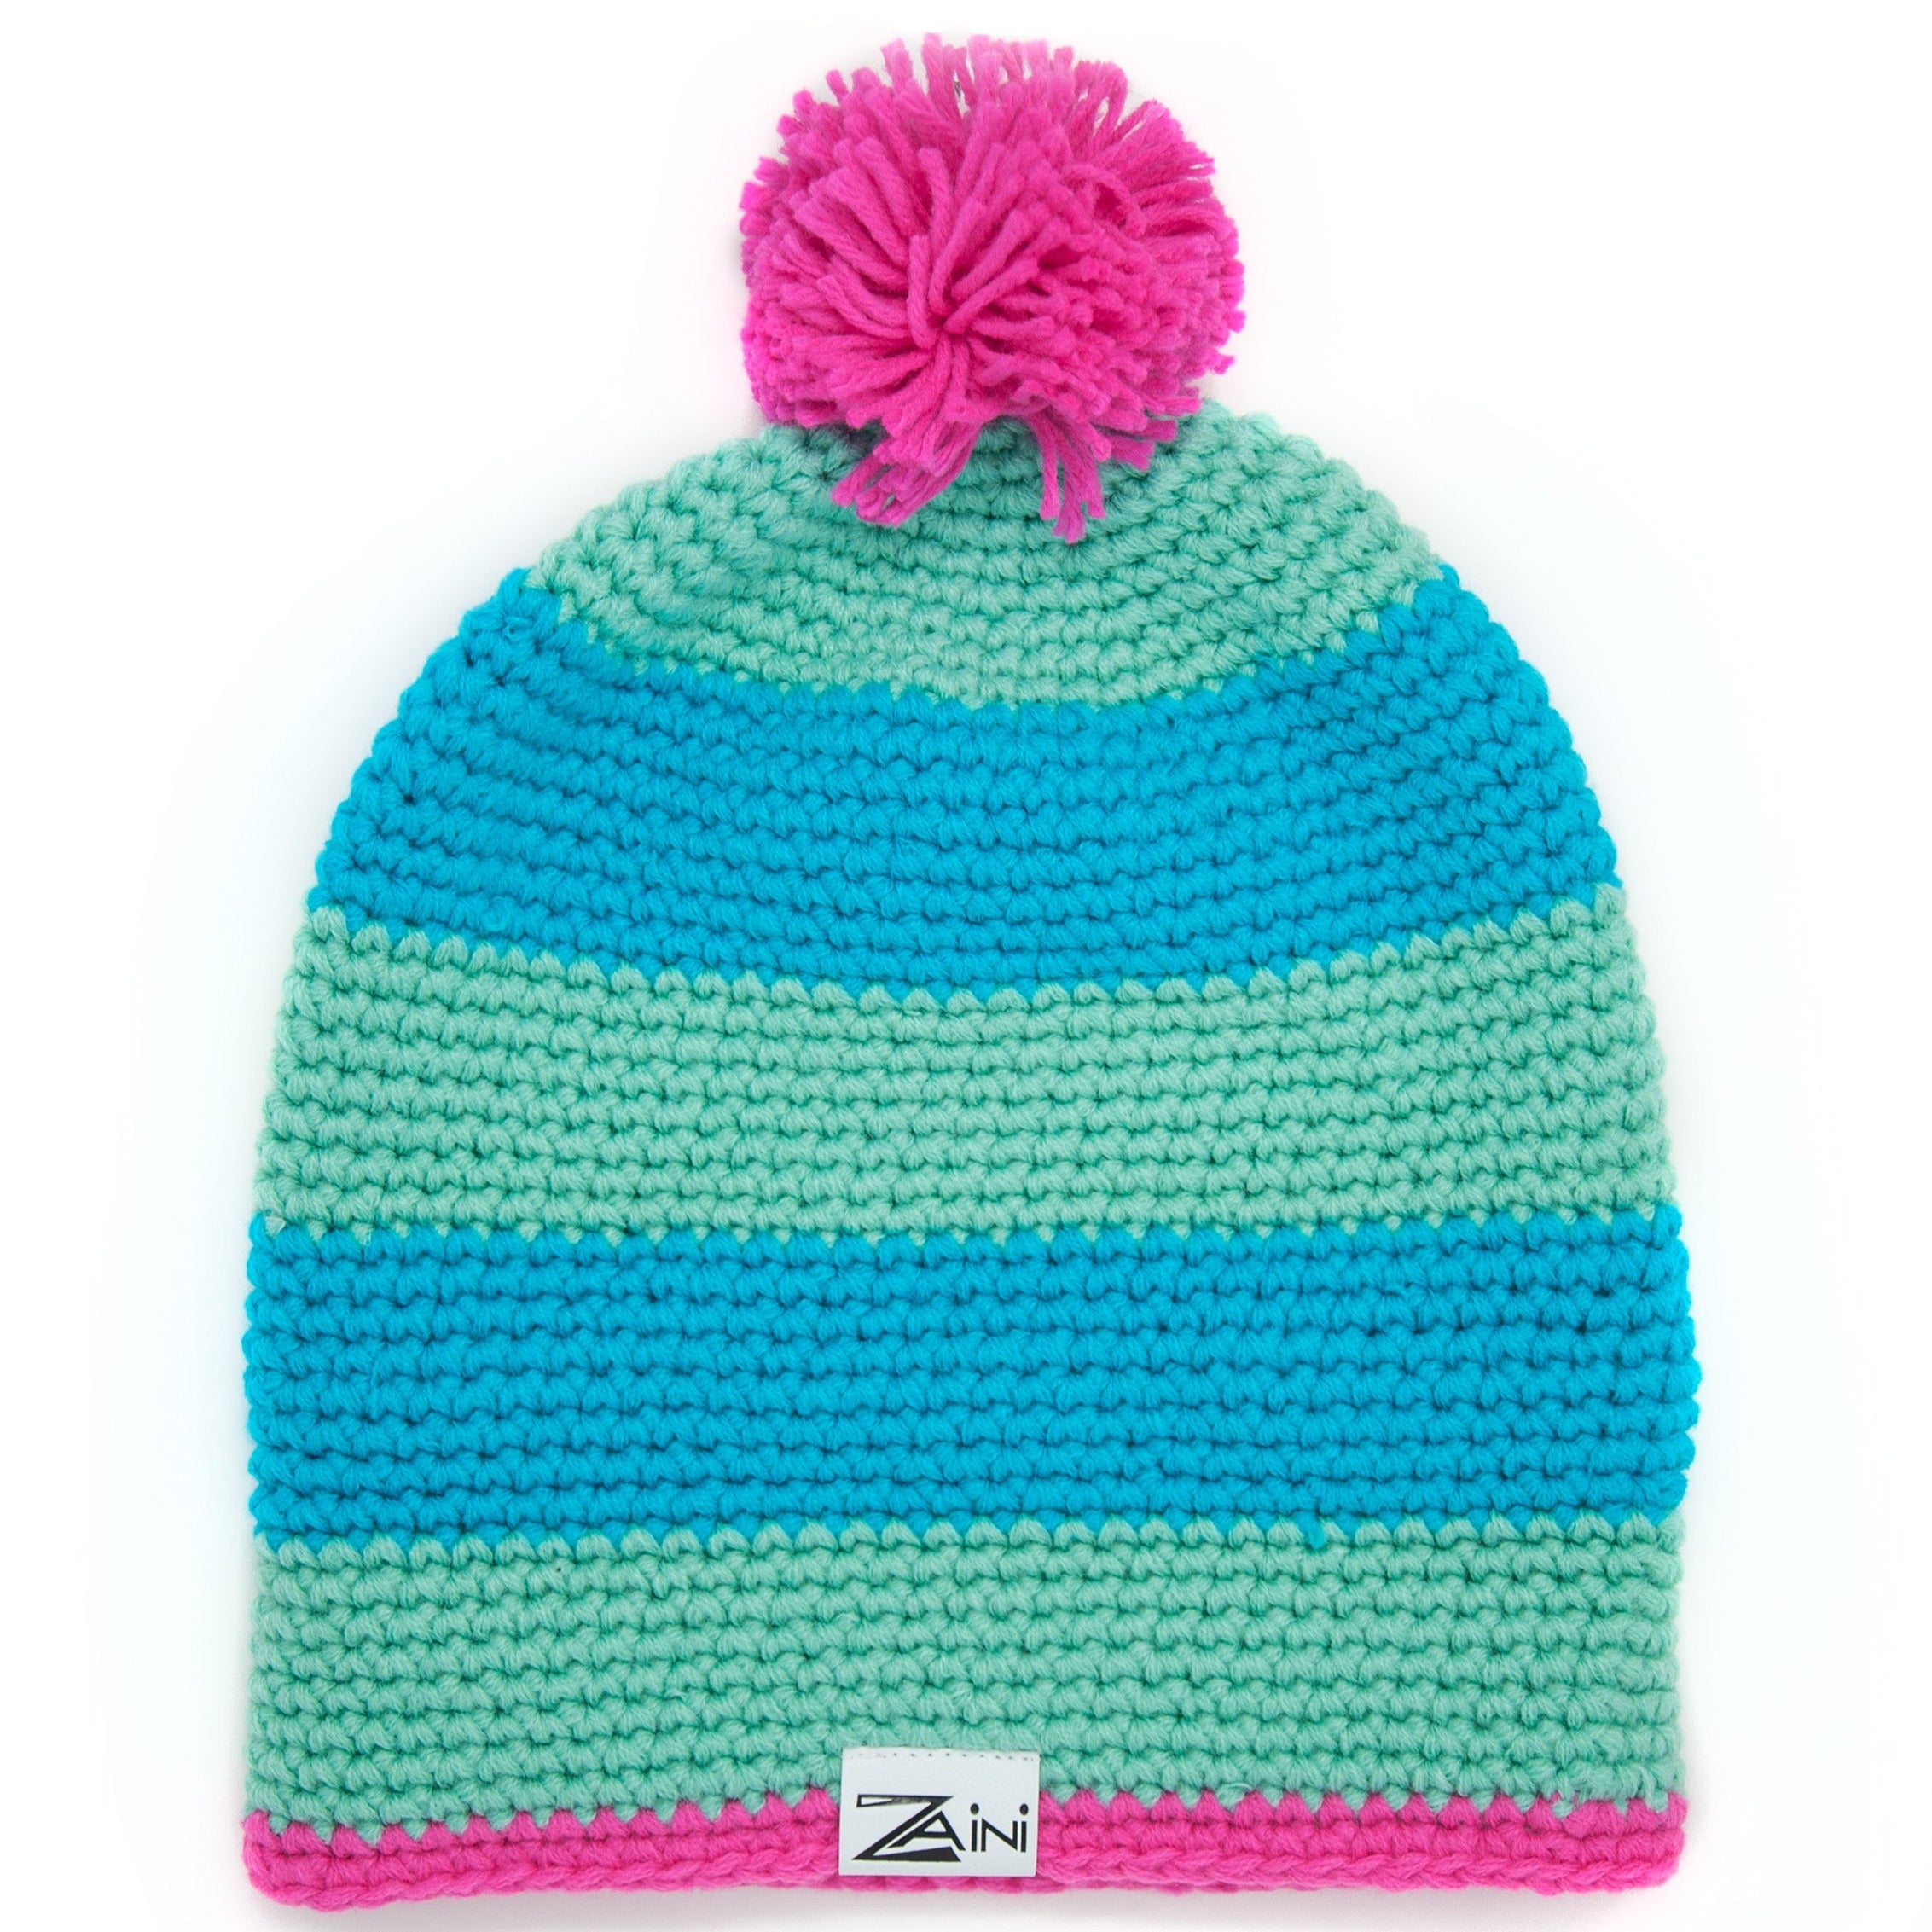 Archie 'Fleeced Lined' Beanie Bobble Hat